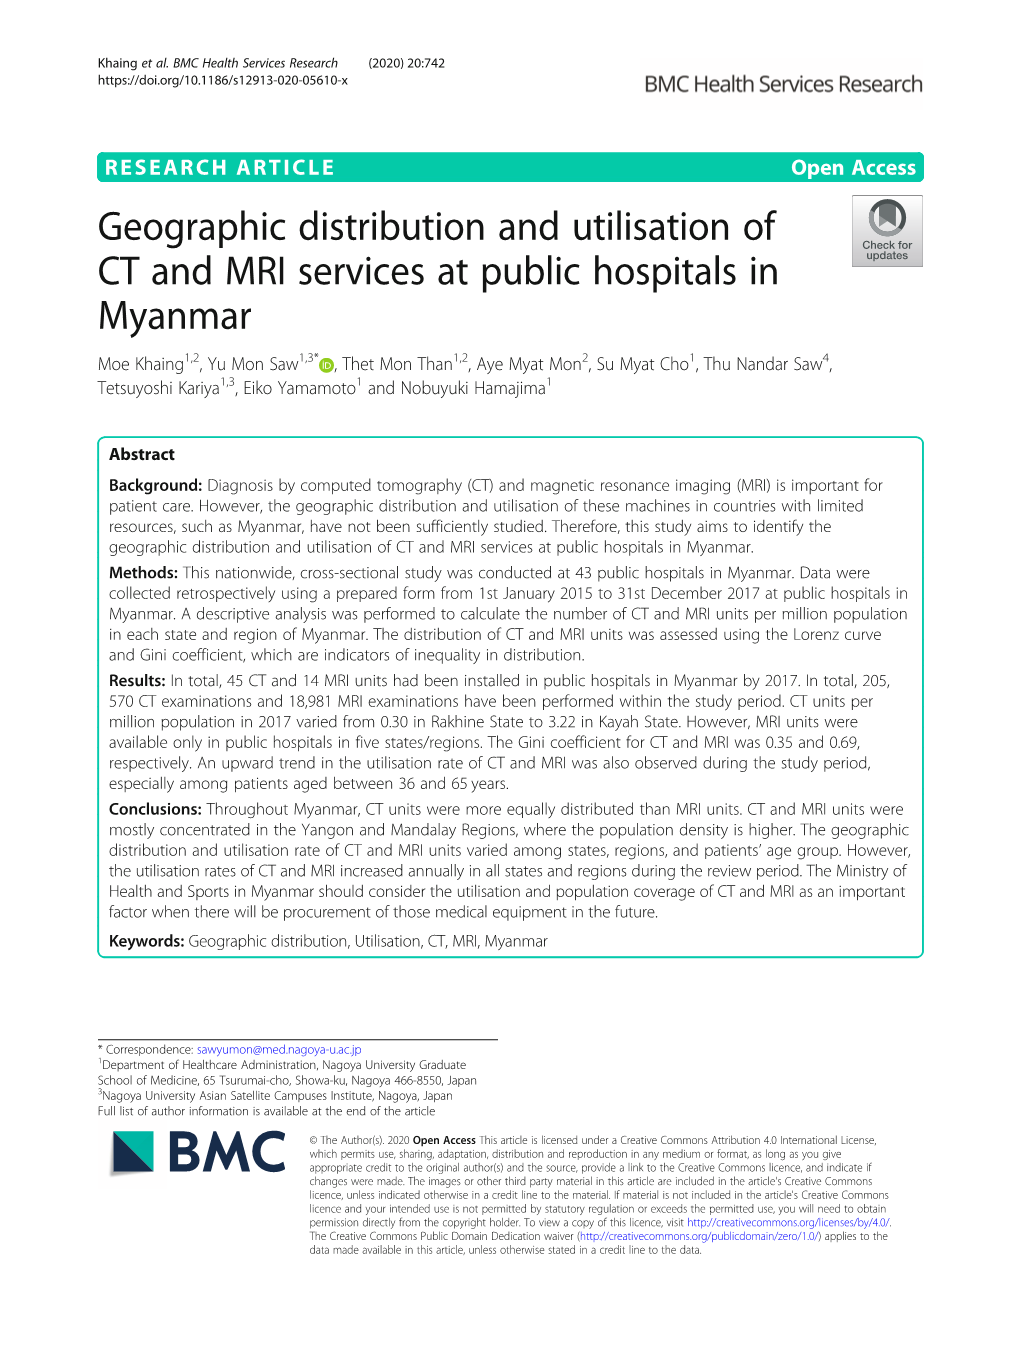 Geographic Distribution and Utilisation of CT and MRI Services at Public Hospitals in Myanmar